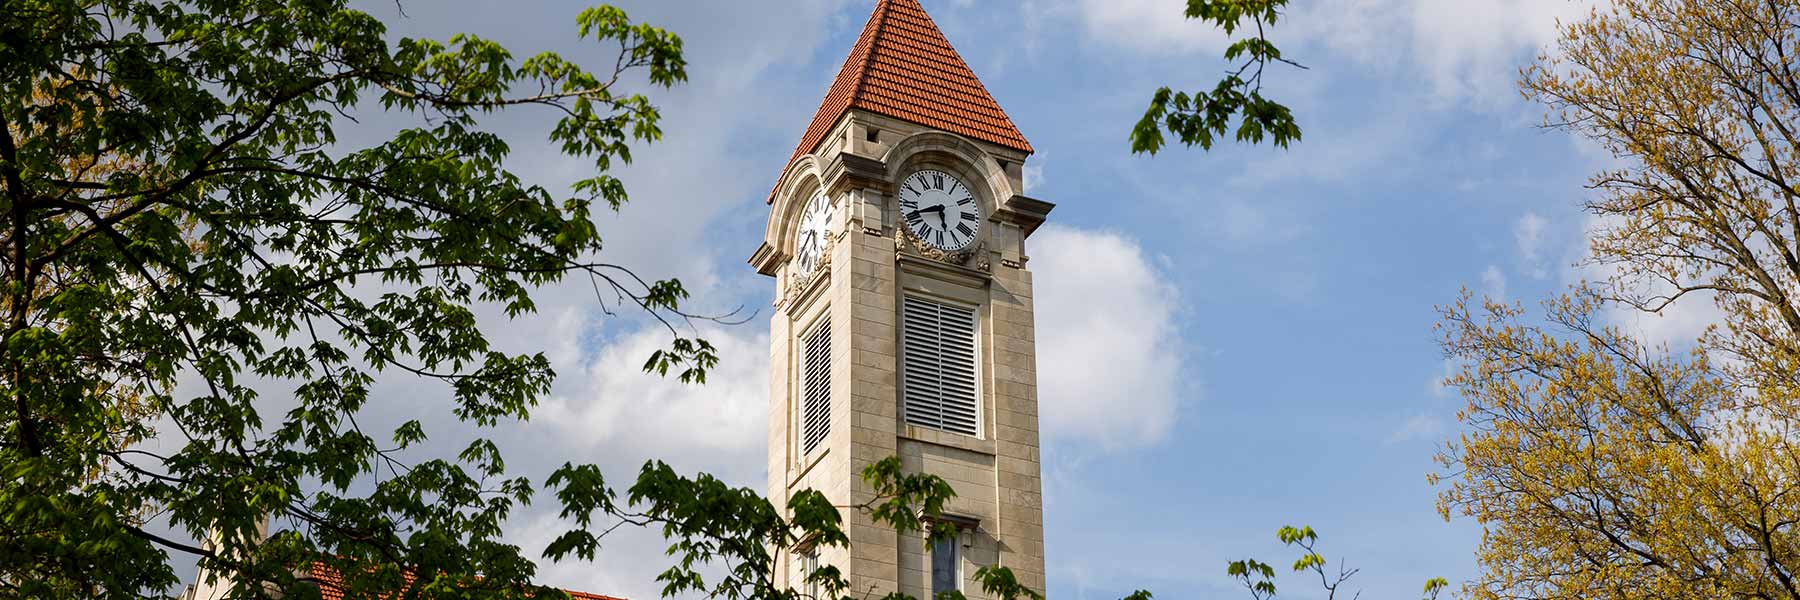 The Student Building clock tower on a spring afternoon